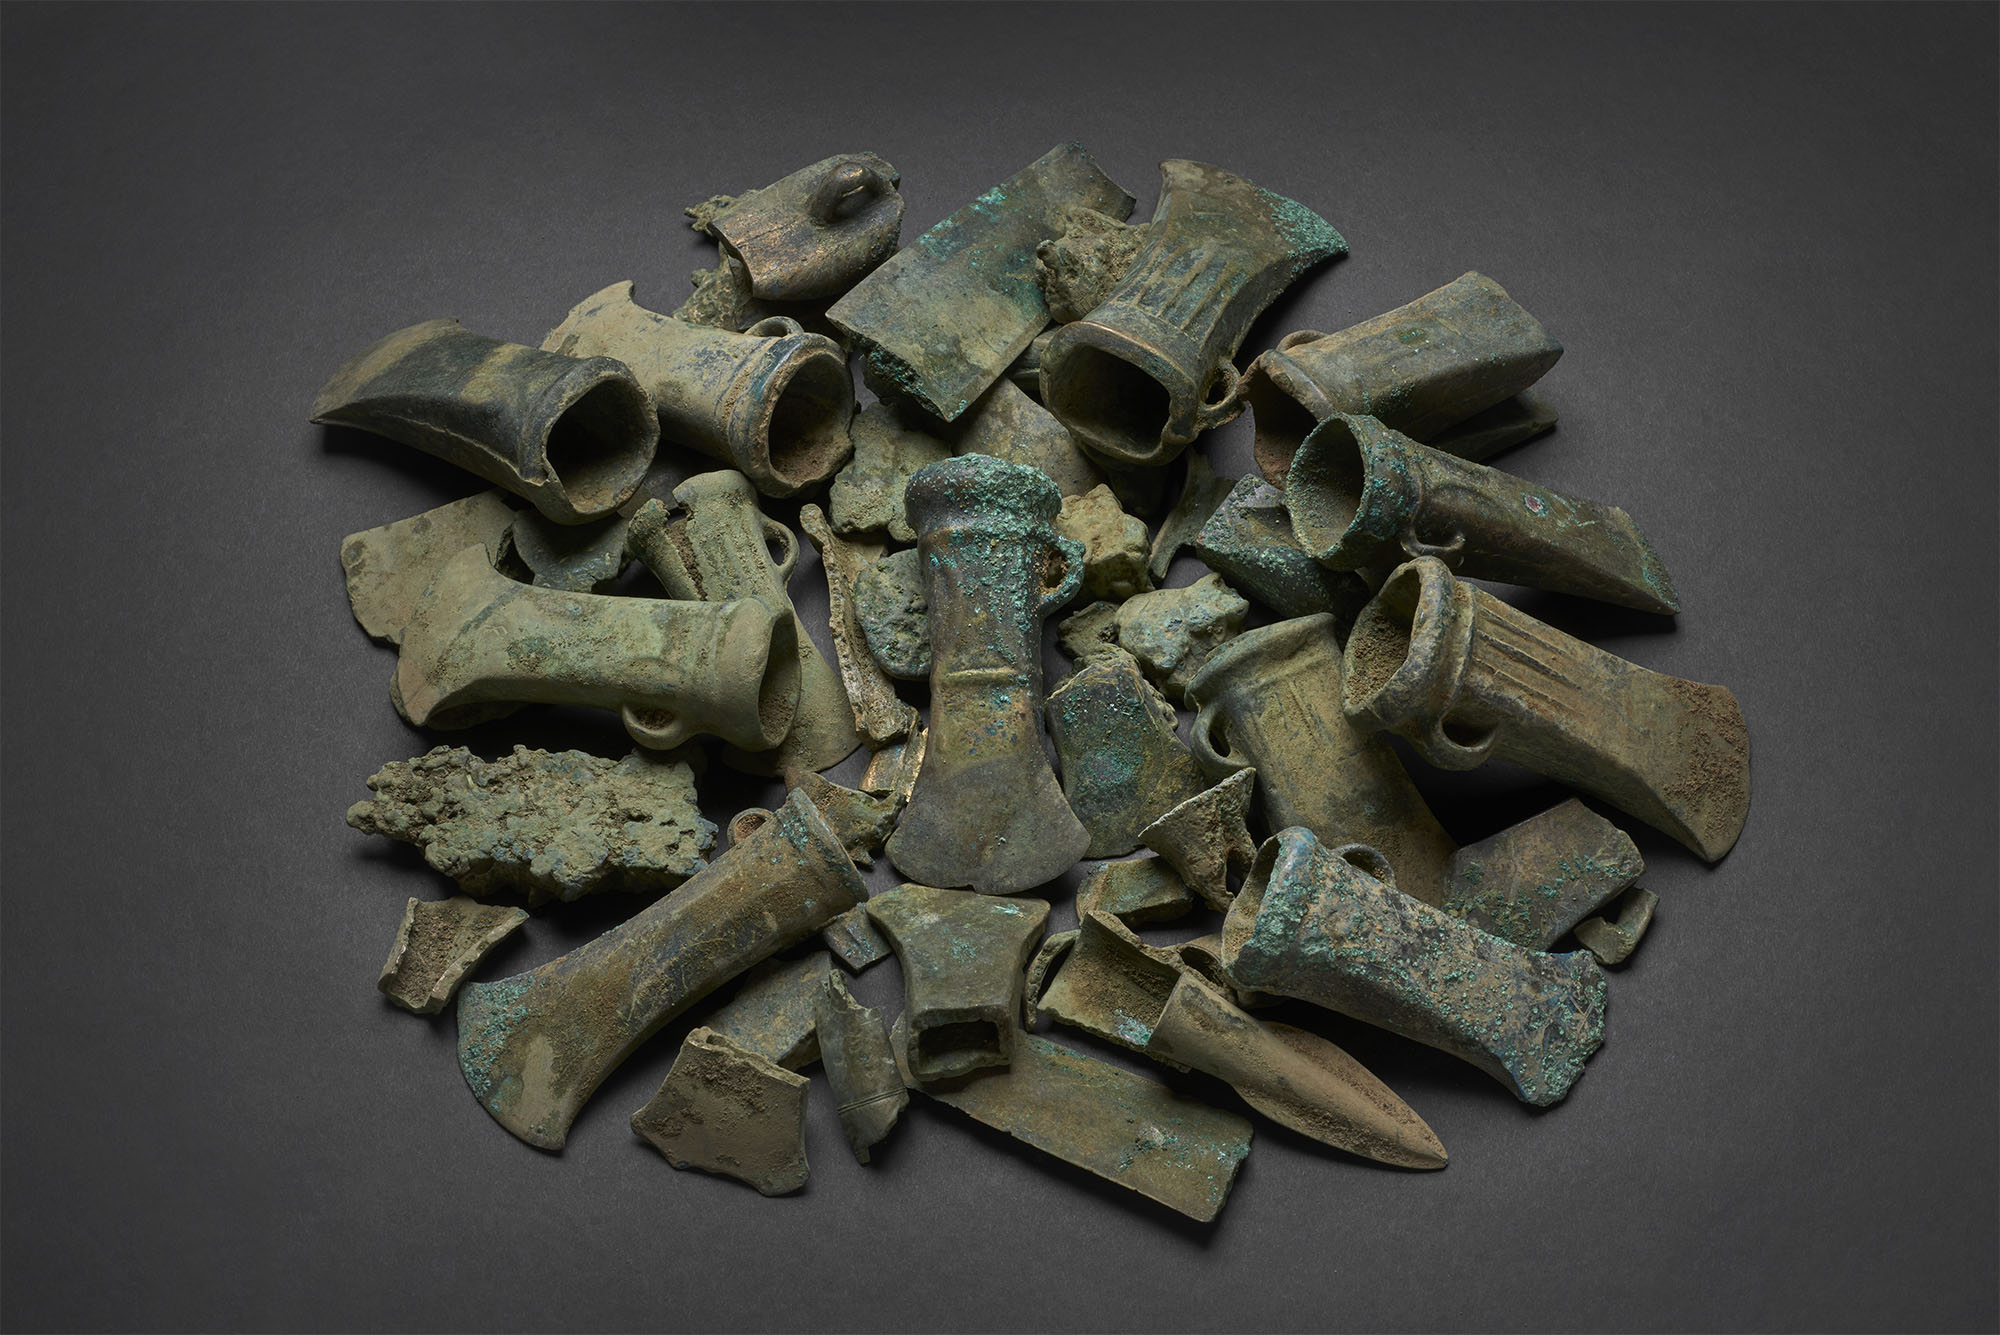 A selection of objects from the Havering Hoard